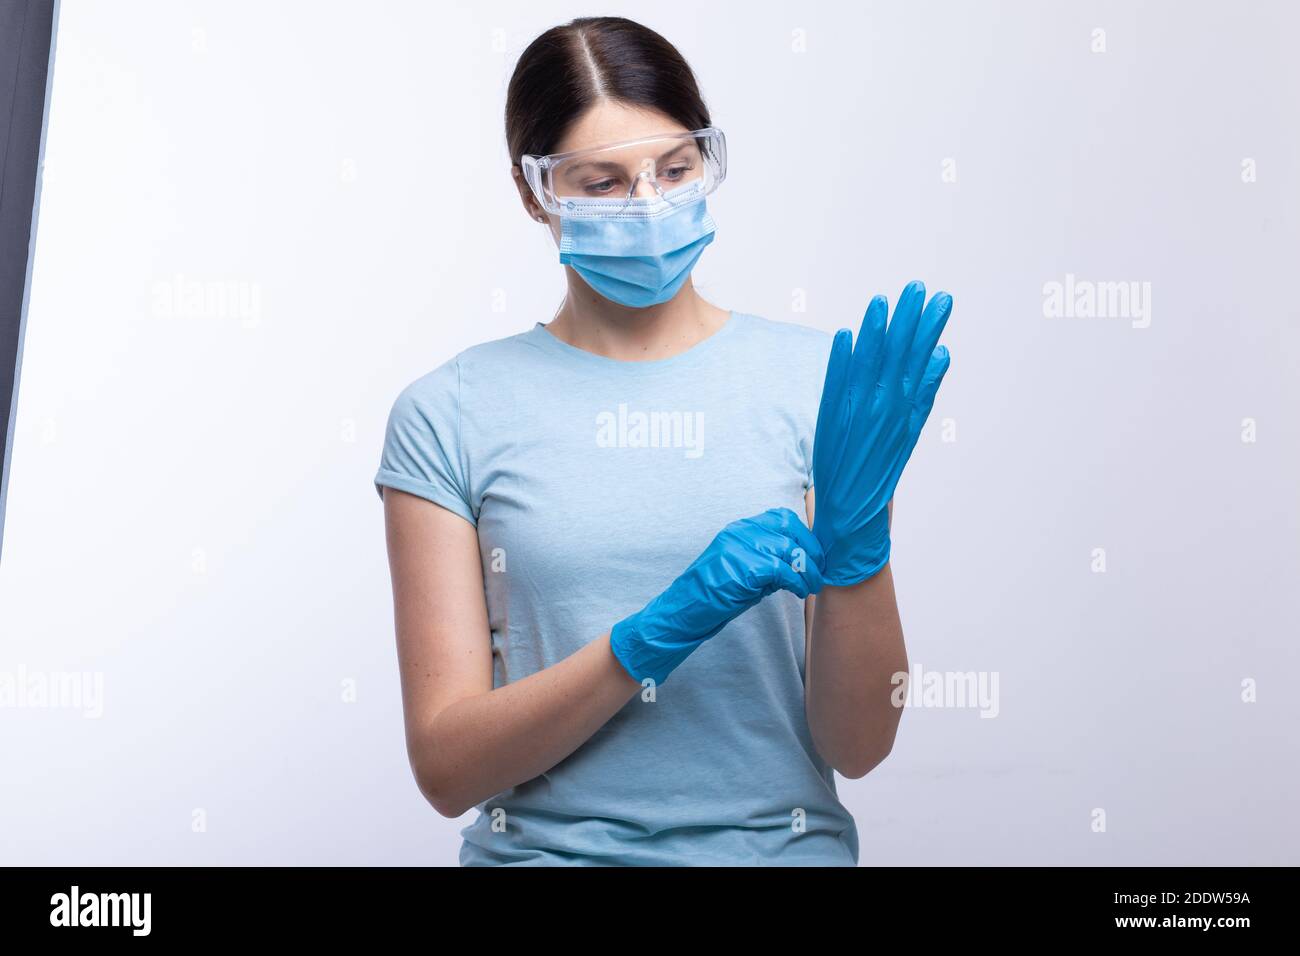 Nurse or doctor wearing and checking protective equipment against viruses and bacterial disease stock photo Stock Photo